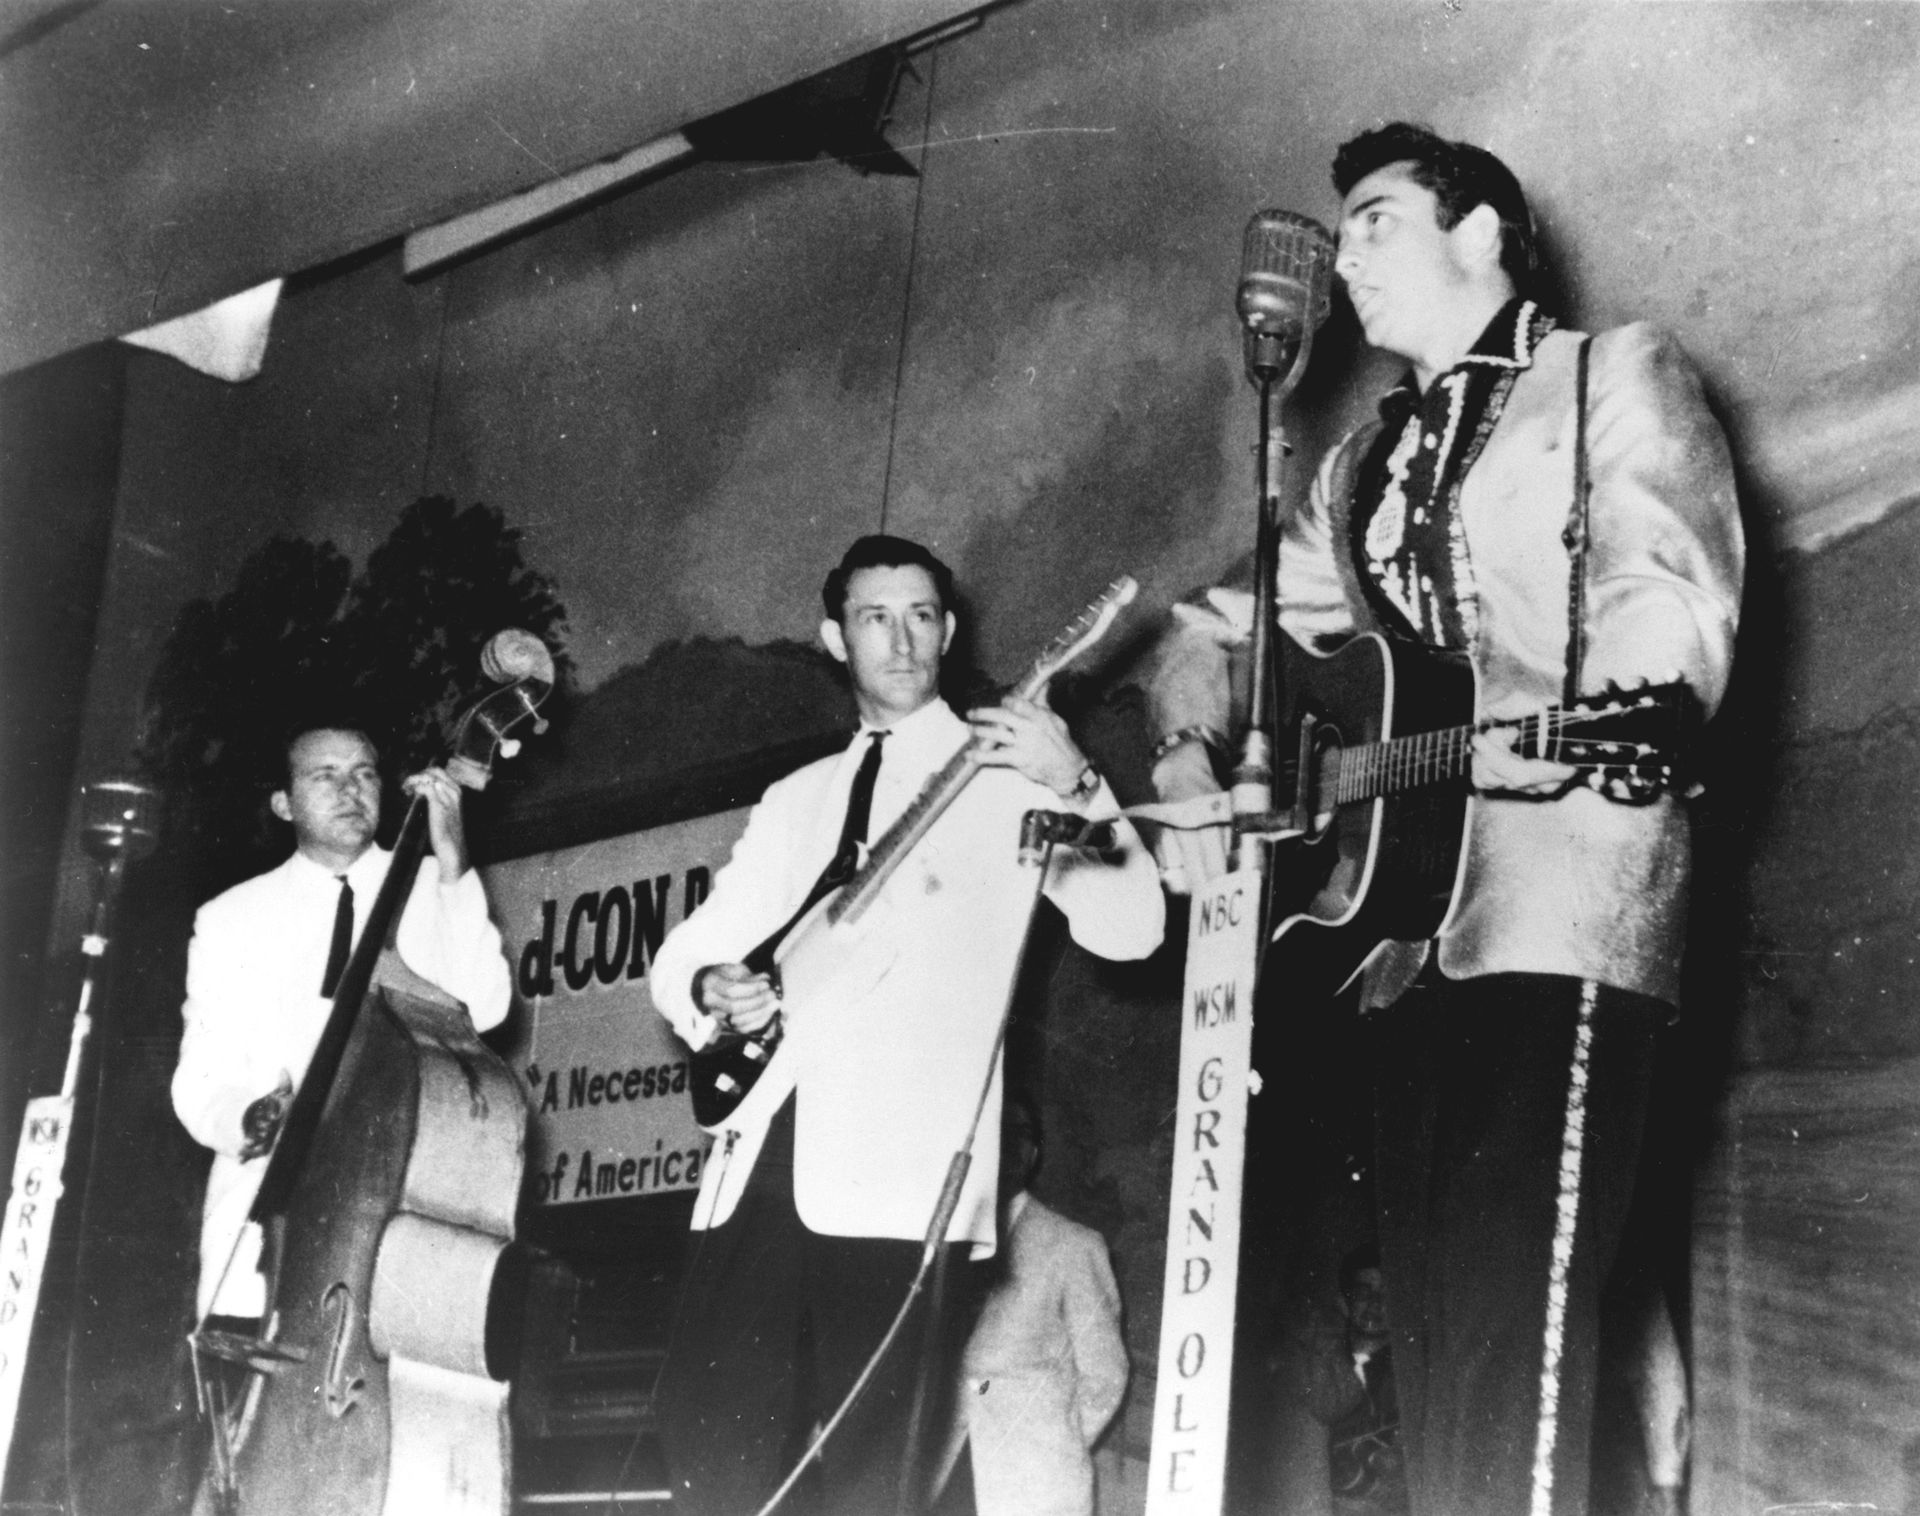 Johnny Cash joue au Grand Ole Opry avec son groupe The Tennessee Two composé de Marshall Grant et Luther Perkins vers 1956